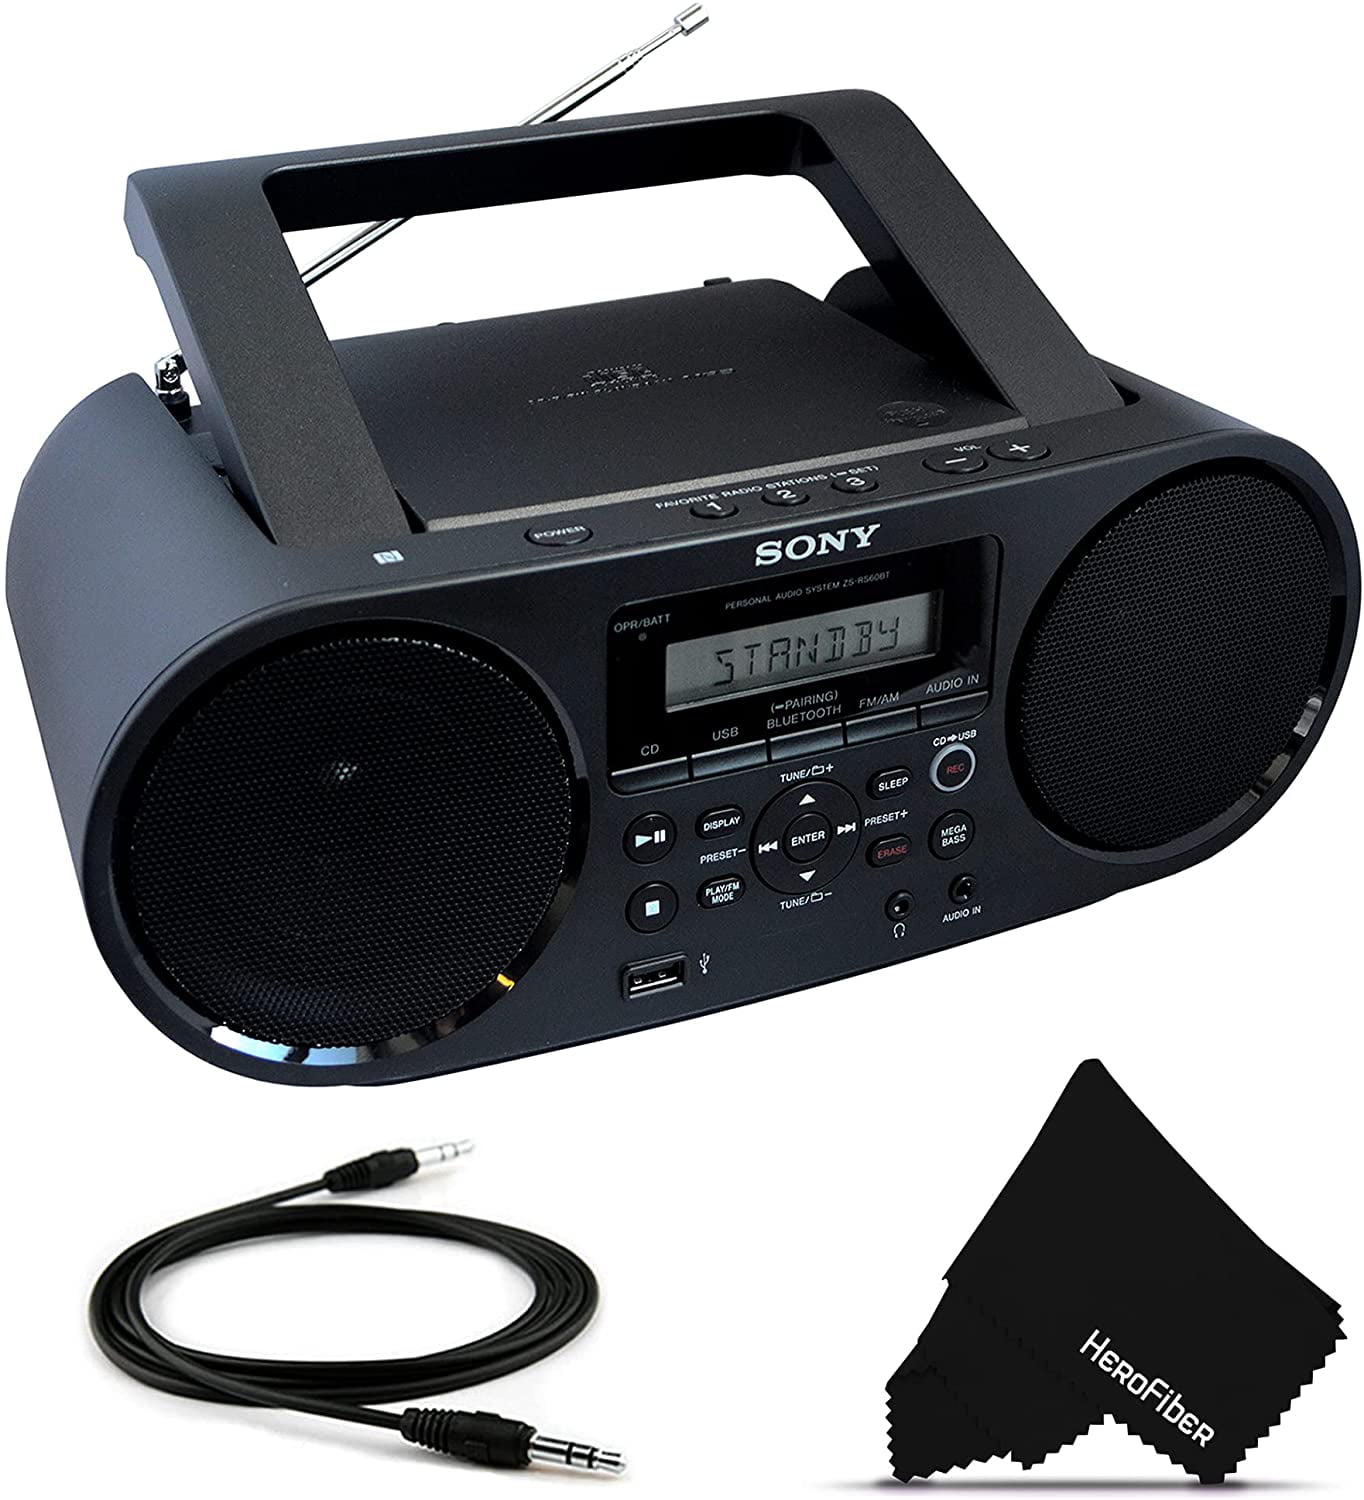 Ematic CD Boombox with AM/FM Radio, Bluetooth Audio and 